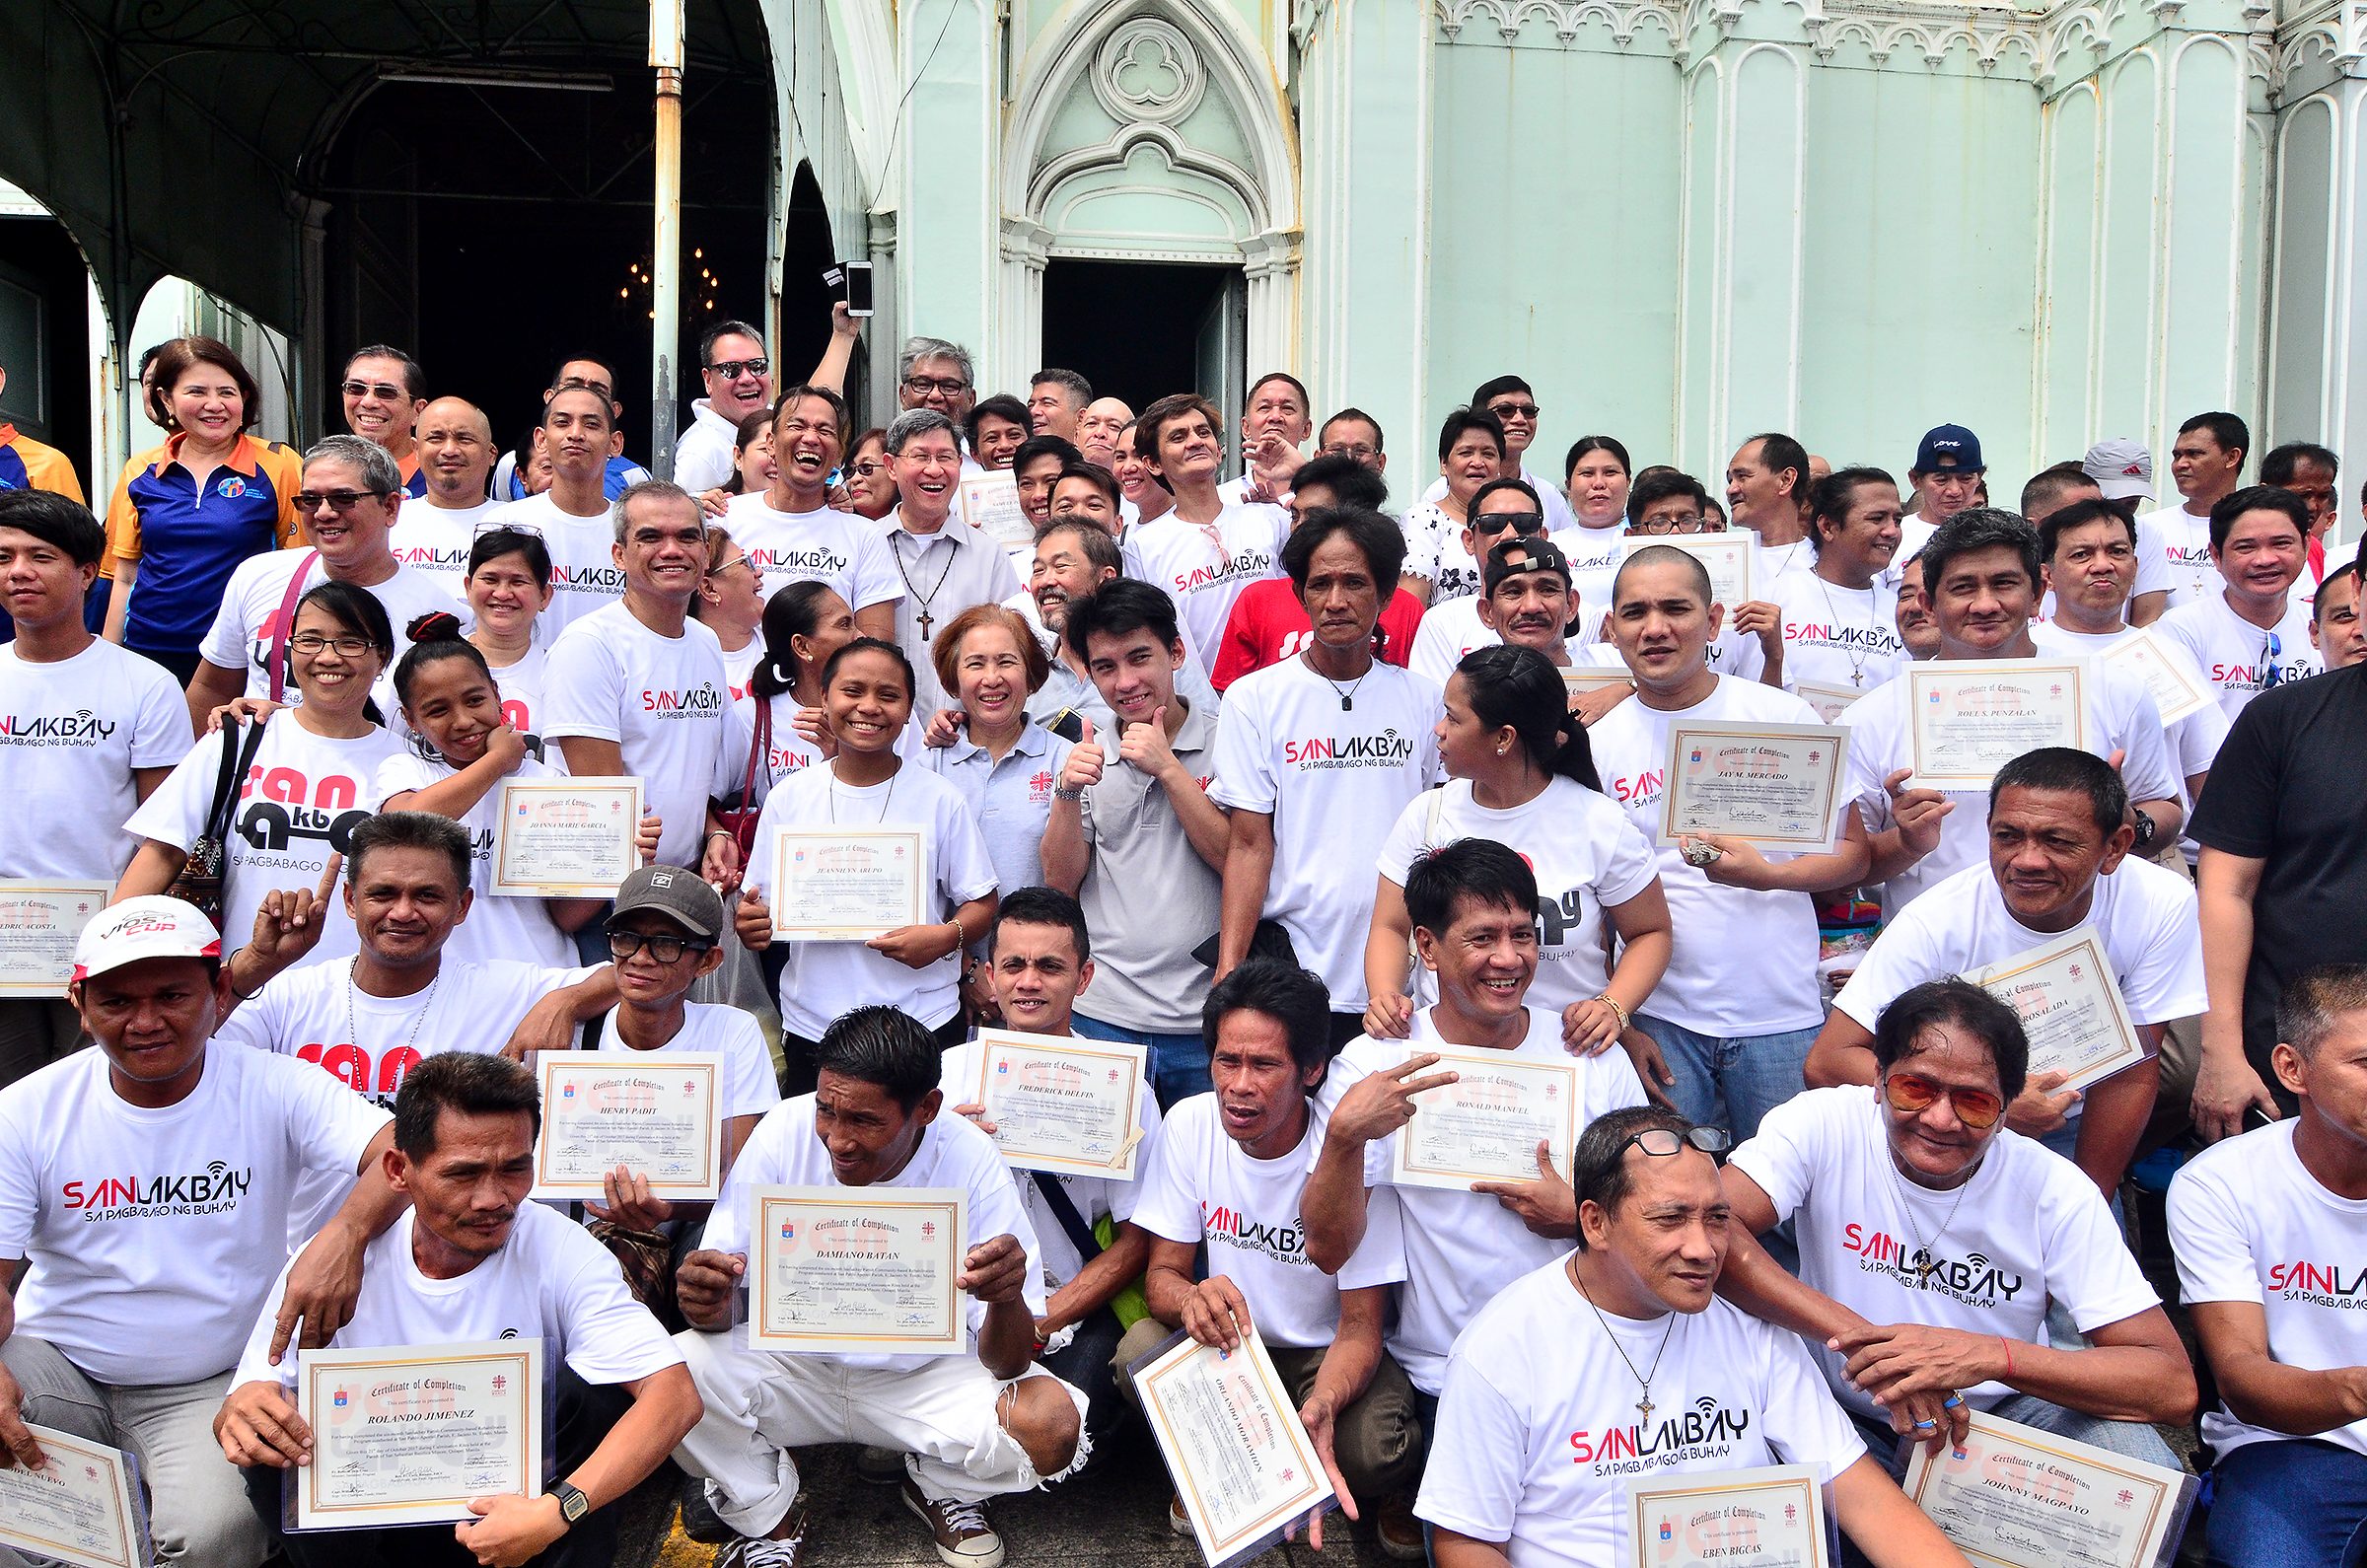 ALL SMILES. More than a hundred former drug dependents graduate from the Catholic Church's drug rehabilitation program. Photo by Maria Tan/Rappler  